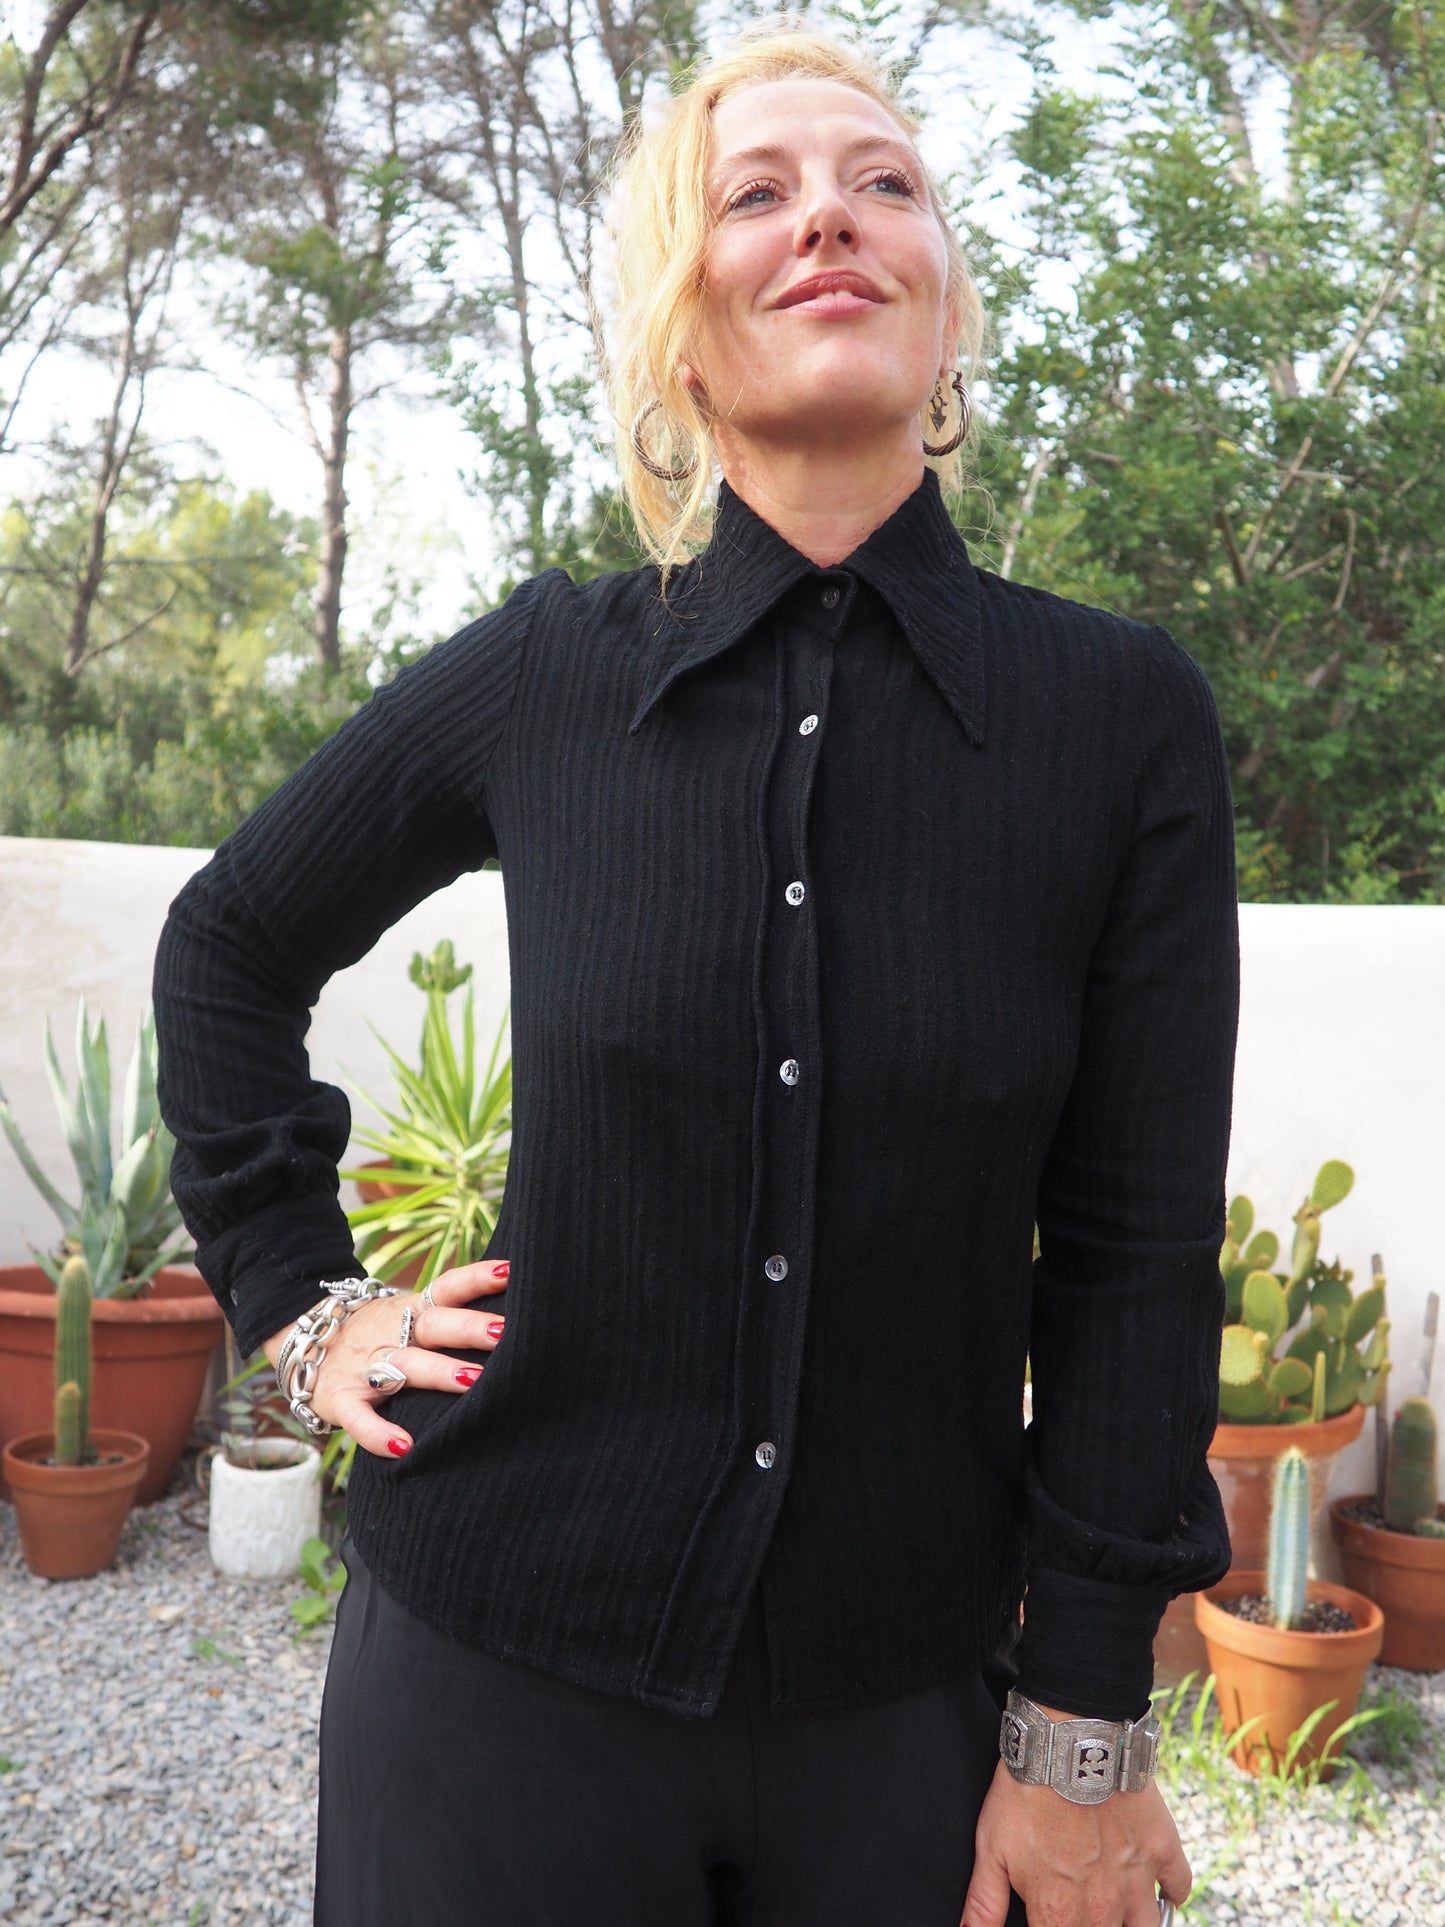 Vintage 1970’s black shirt with buttons down the front oversized collars and back tie details